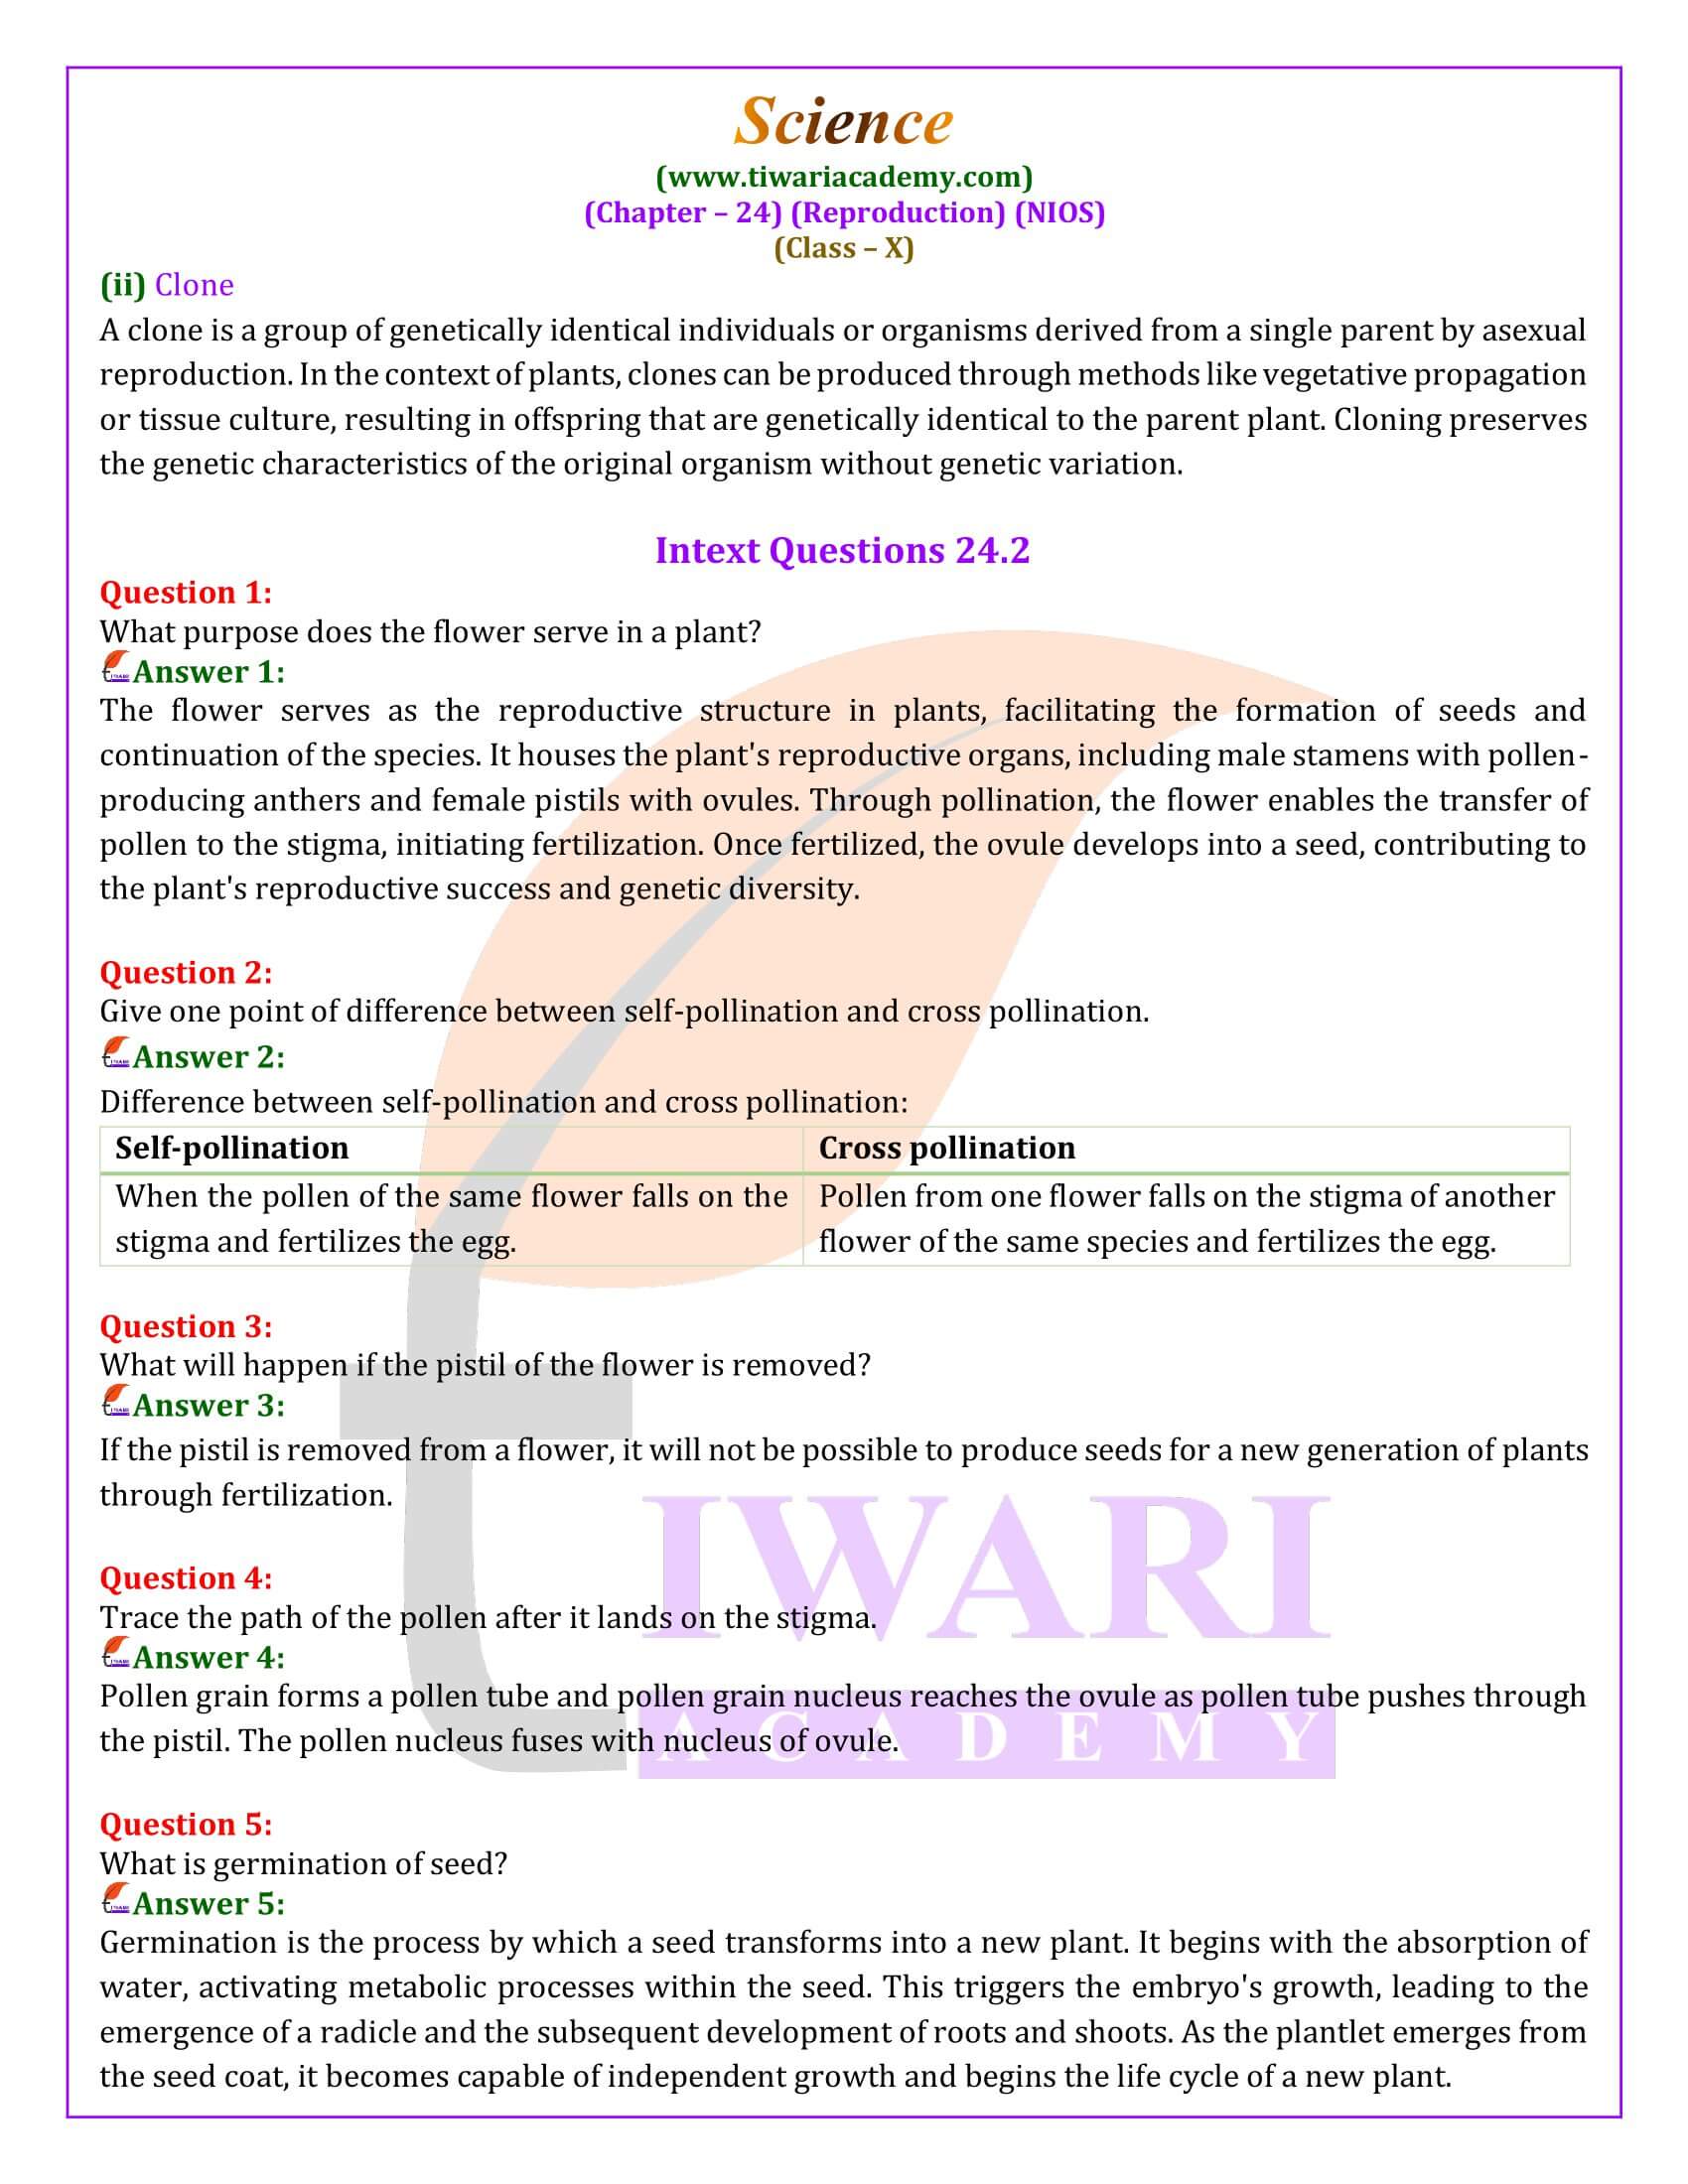 NIOS Class 10 Science Chapter 24 Life Processes III: Reproduction Question Answers